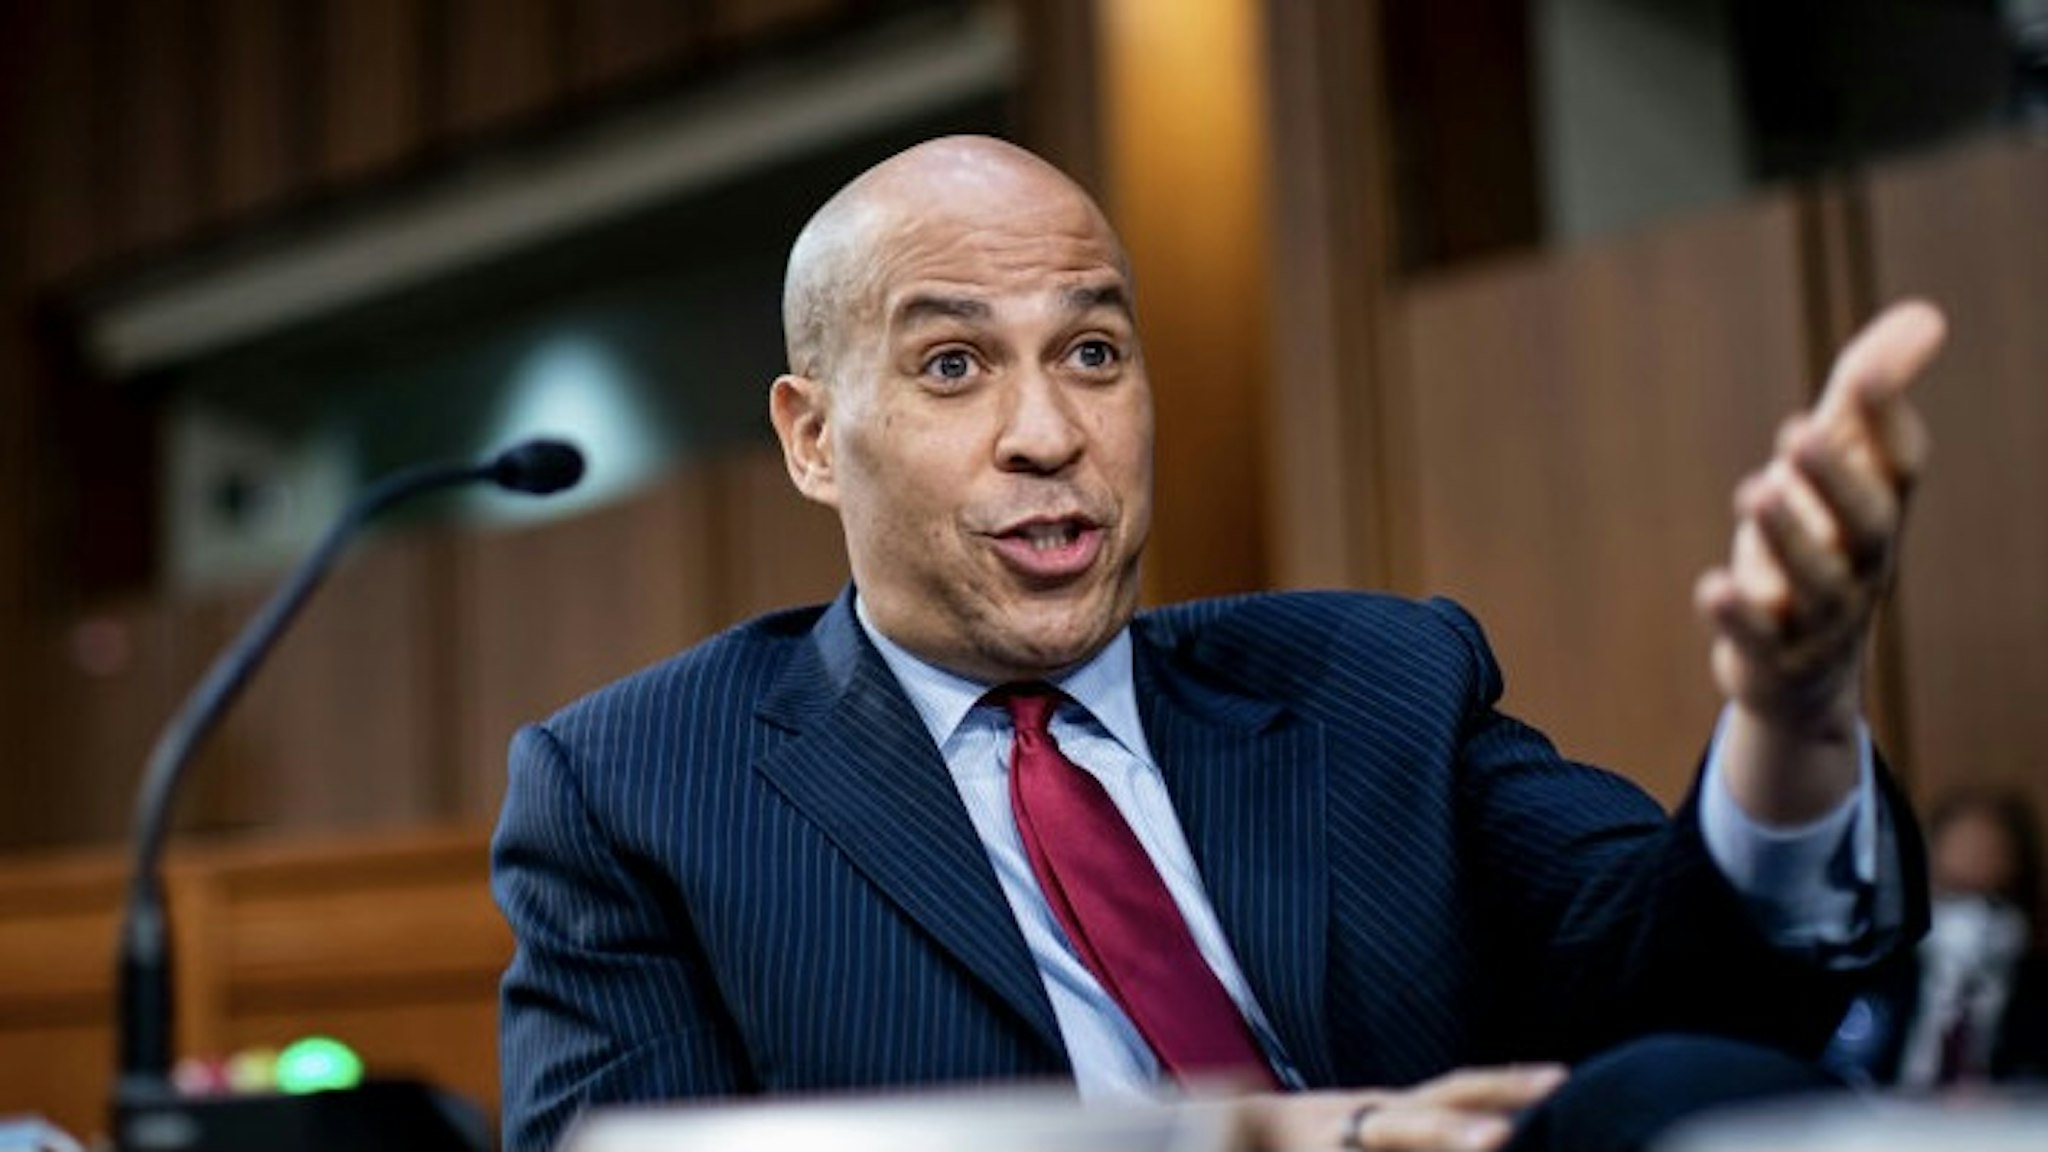 WASHINGTON, DC - FEBRUARY 22: Sen. Cory Booker (D-NJ) speaks during Attorney General nominee Merrick Garland's confirmation hearing before the Senate Judiciary Committee in the Hart Senate Office Building on February 22, 2021 in Washington, DC. Garland previously served as the Chief Judge for the U.S. Court of Appeals for the District of Columbia Circuit.(Photo by Al Drago/Getty Images)